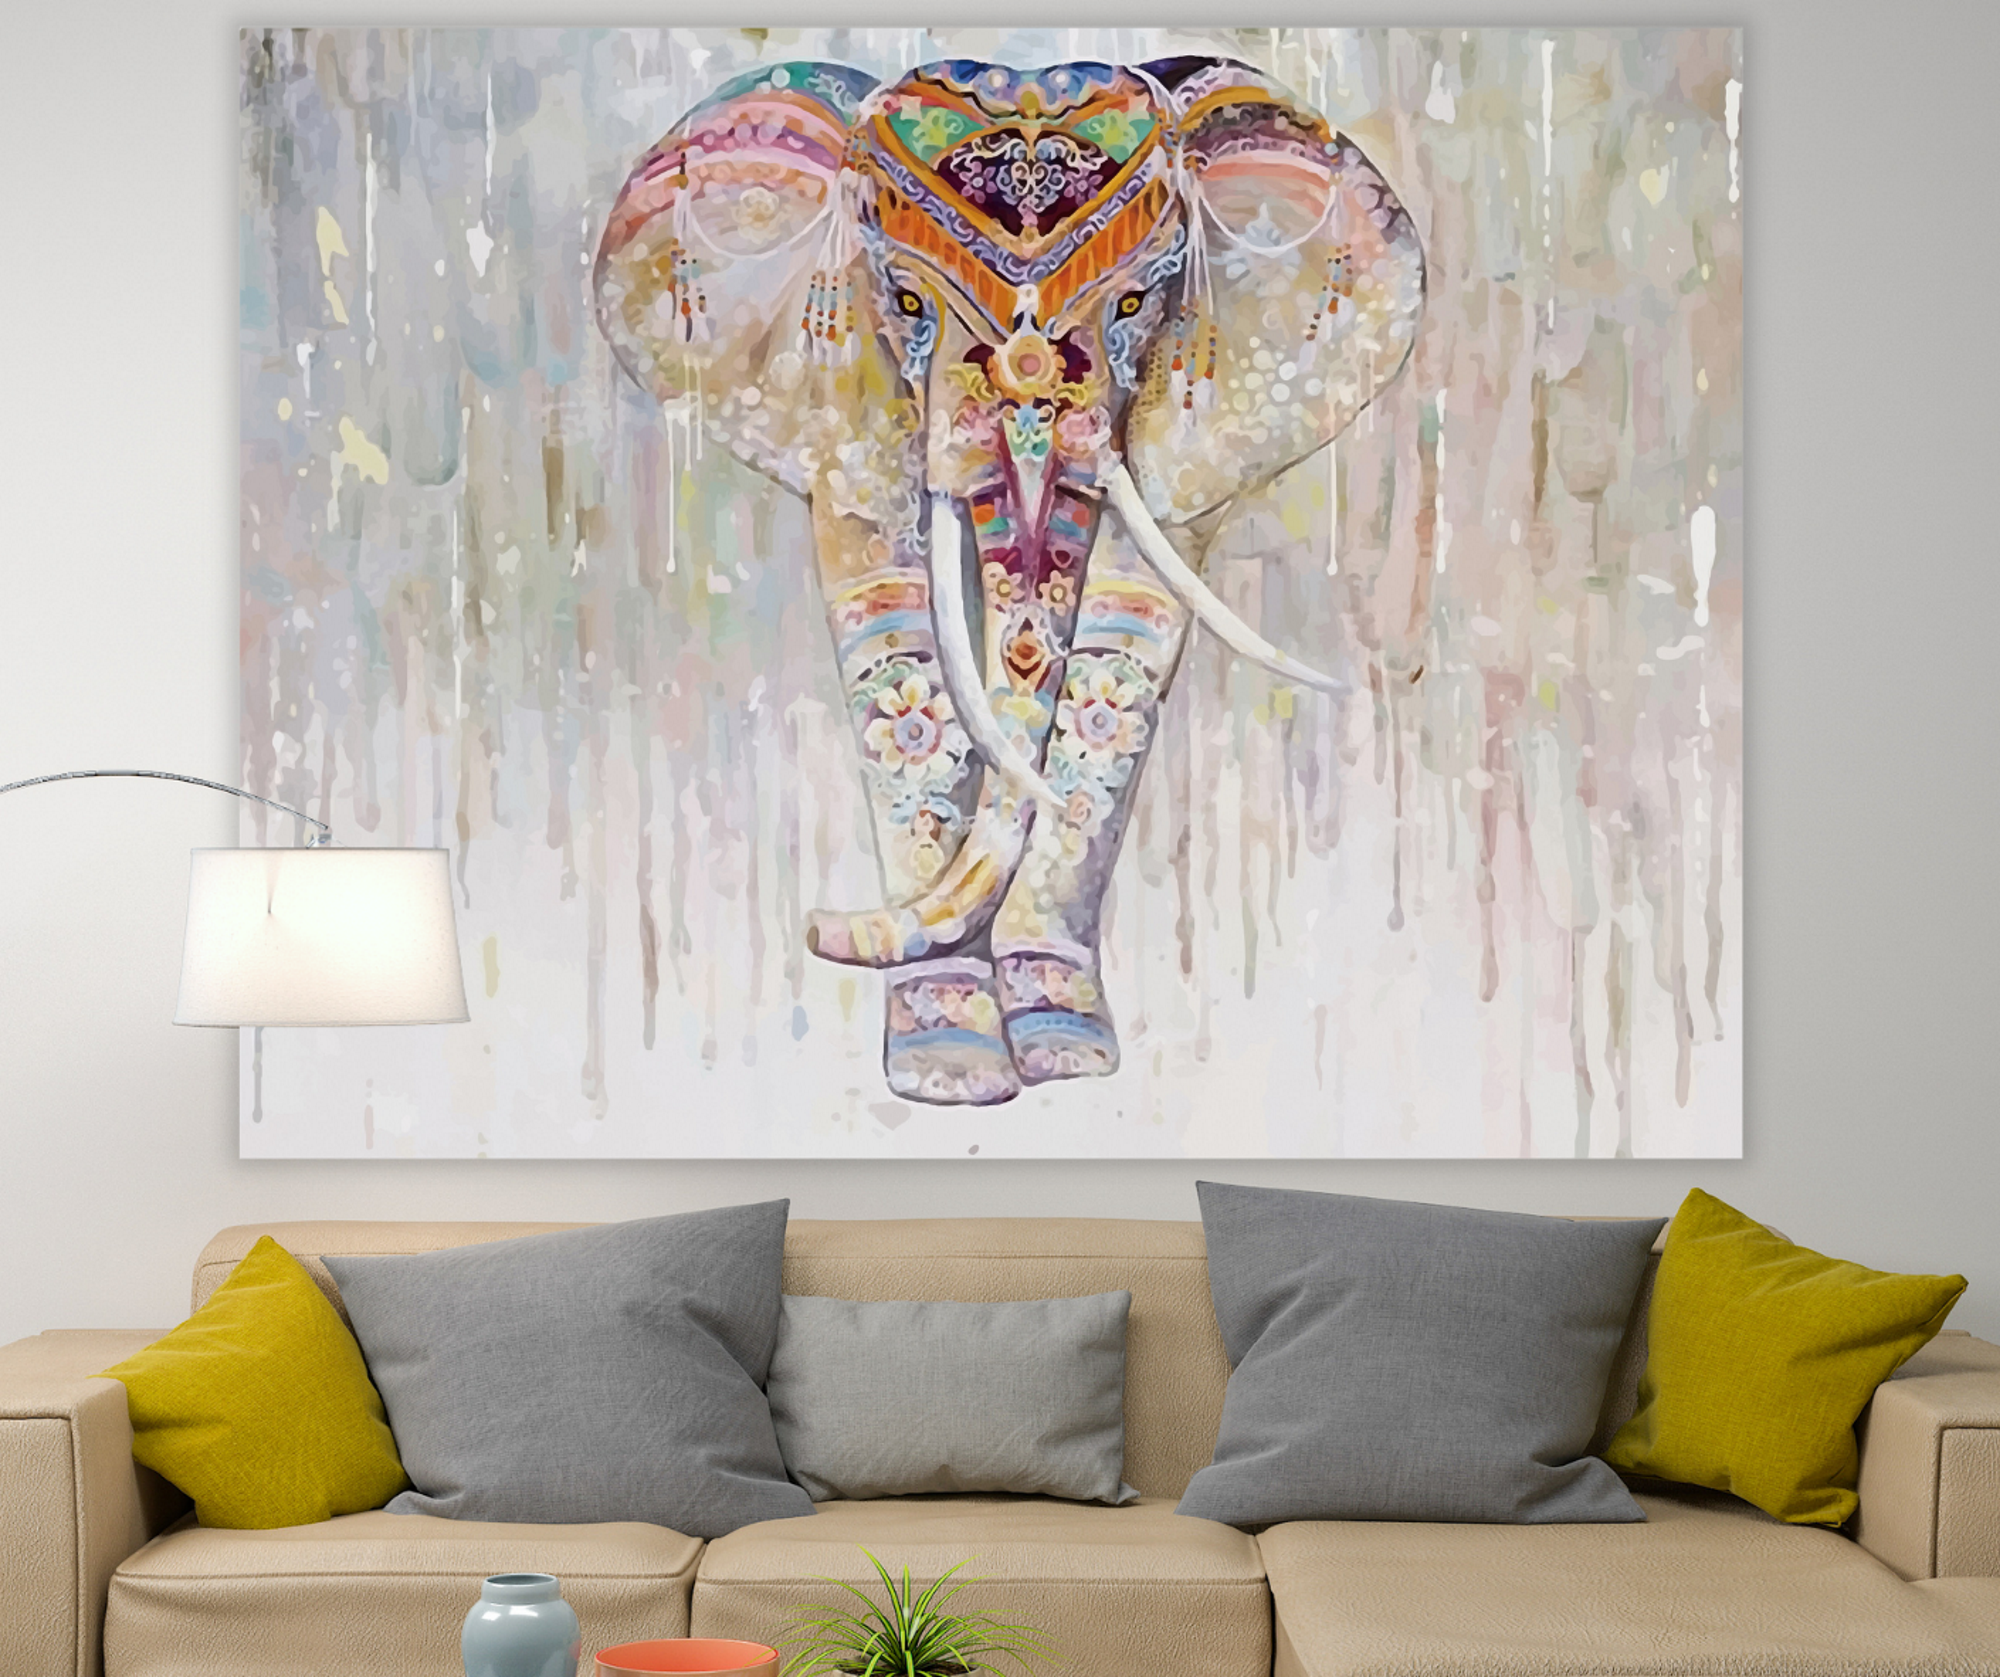 KaiSha LED Tapestry Bundle; LARGE SIZE; Tapestry+ 2 Rods; Aesthetic Tapestries Wall Accent Backdrops Modern